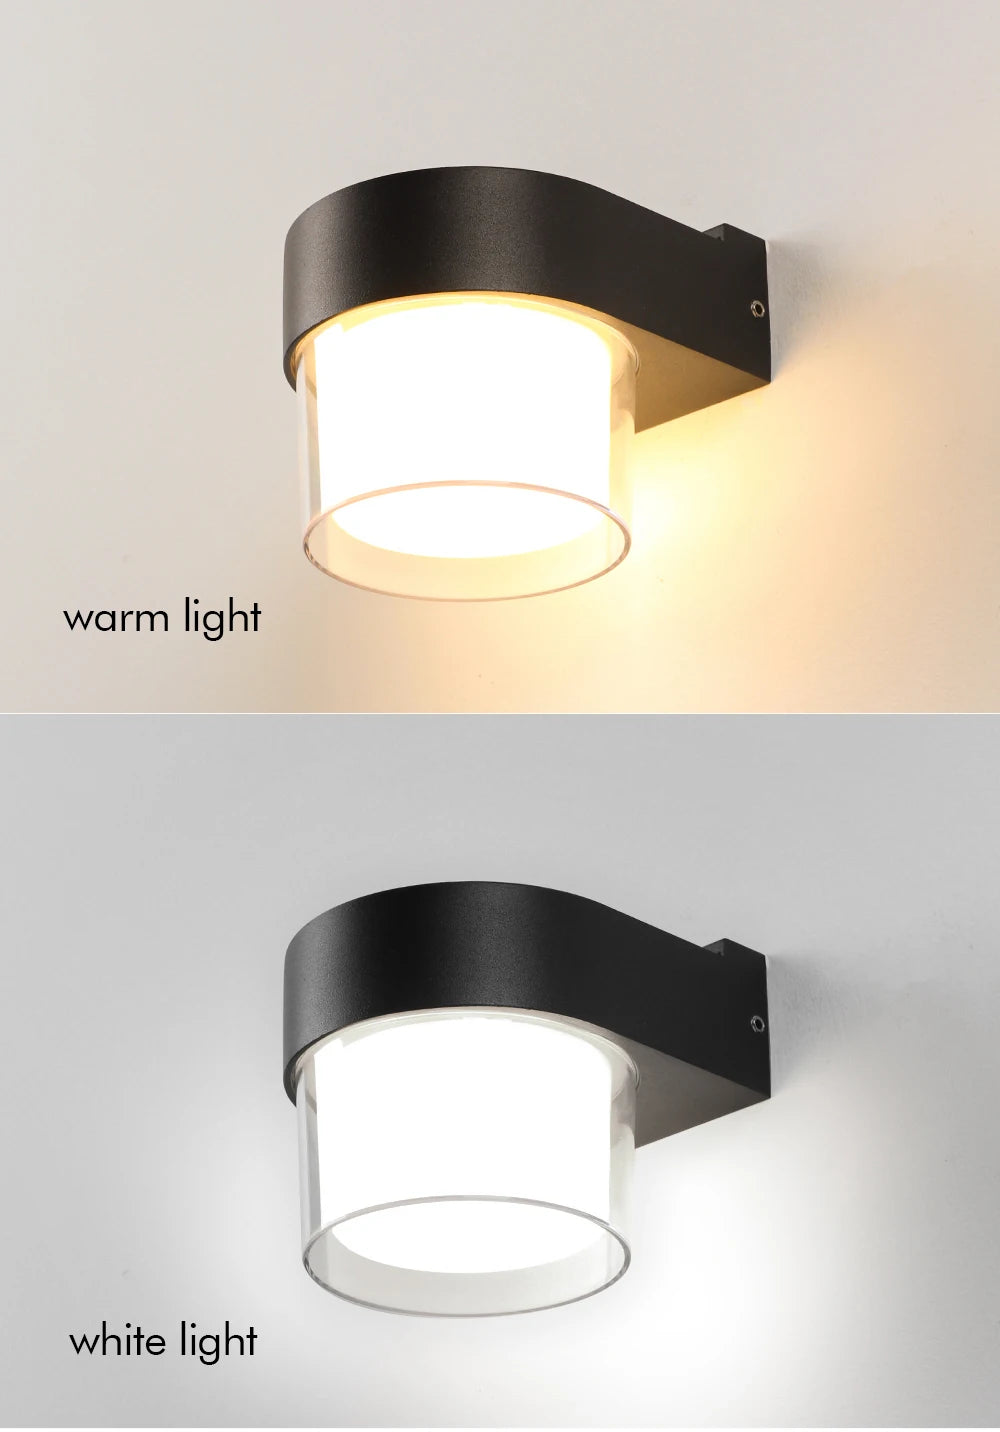 IP65 Waterproof Interior Wall Light, Contact seller first for help with issues before filing a dispute; they'll try to find a satisfying solution.